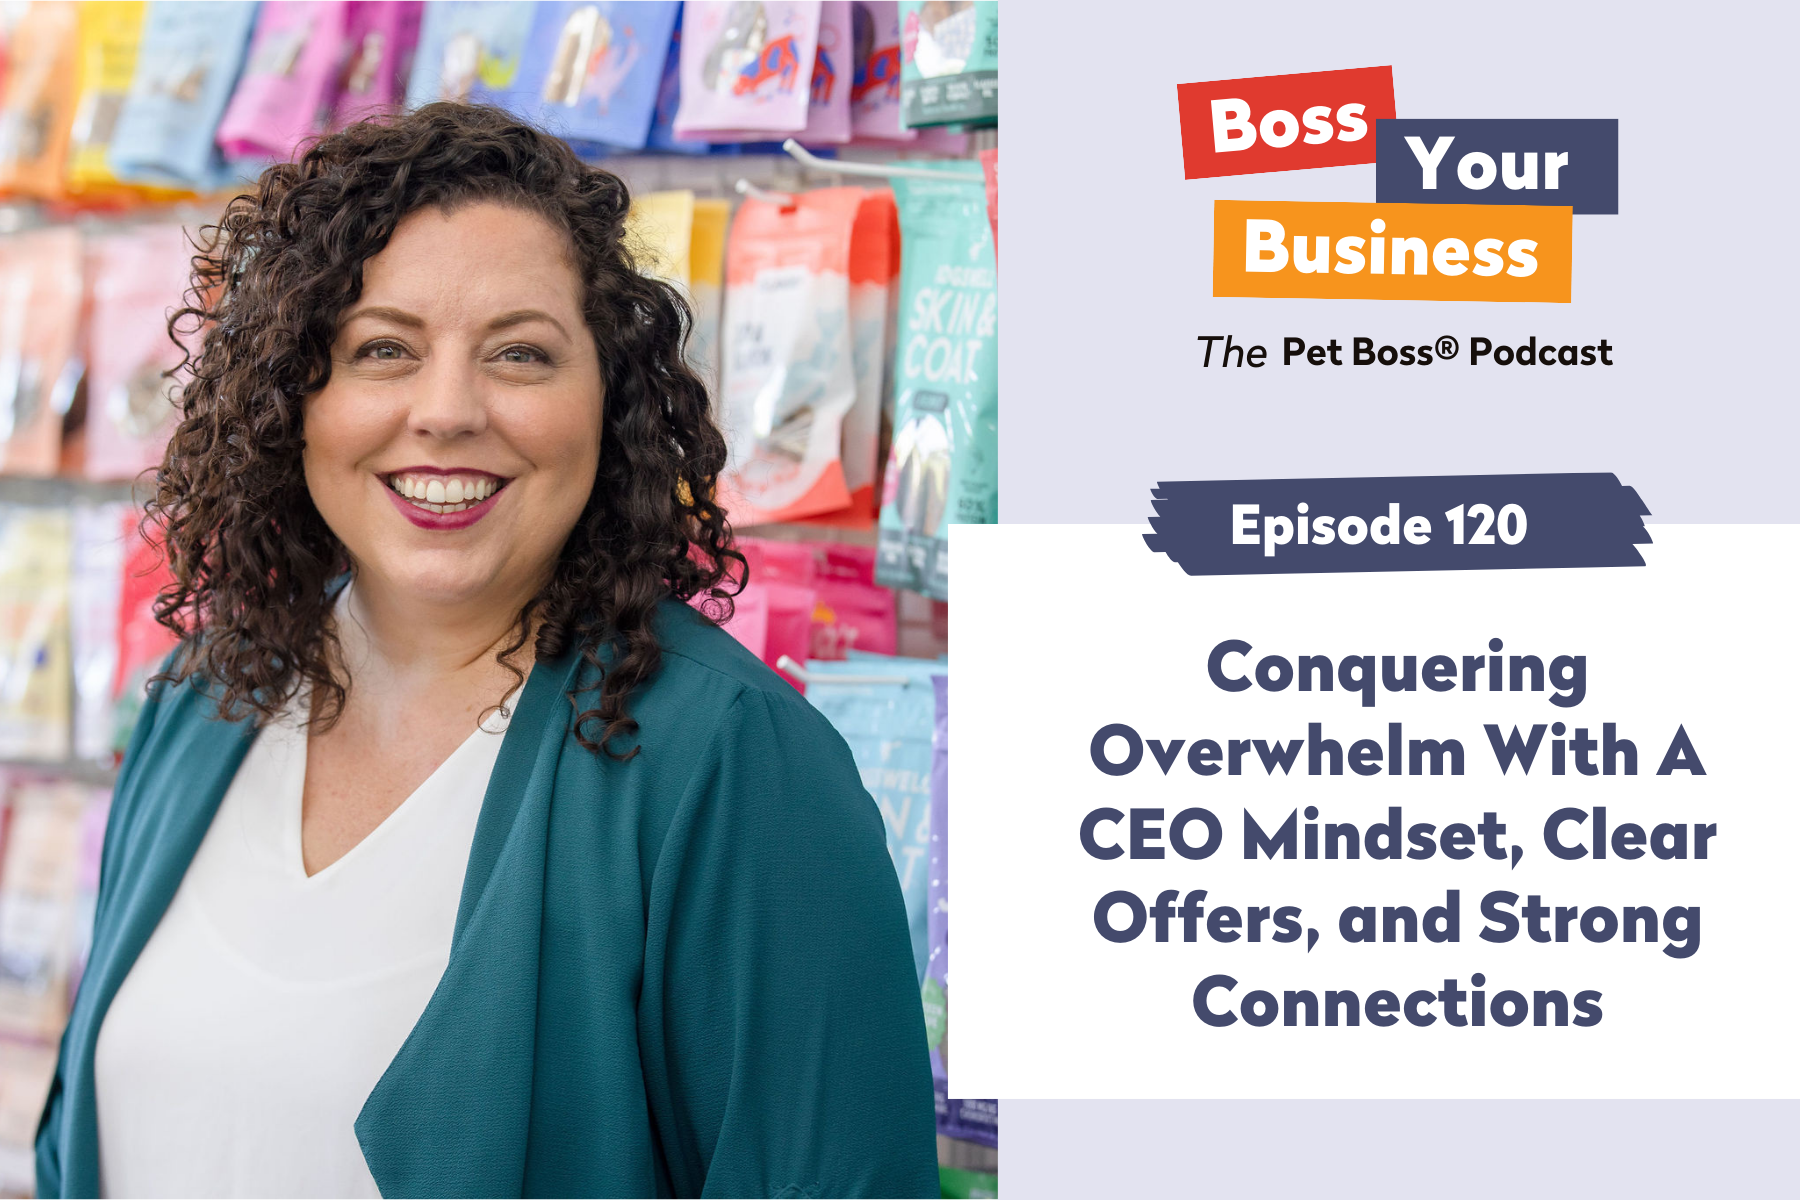 Episode 120 | Conquering Overwhelm With A CEO Mindset, Clear Offers, and Strong Connections